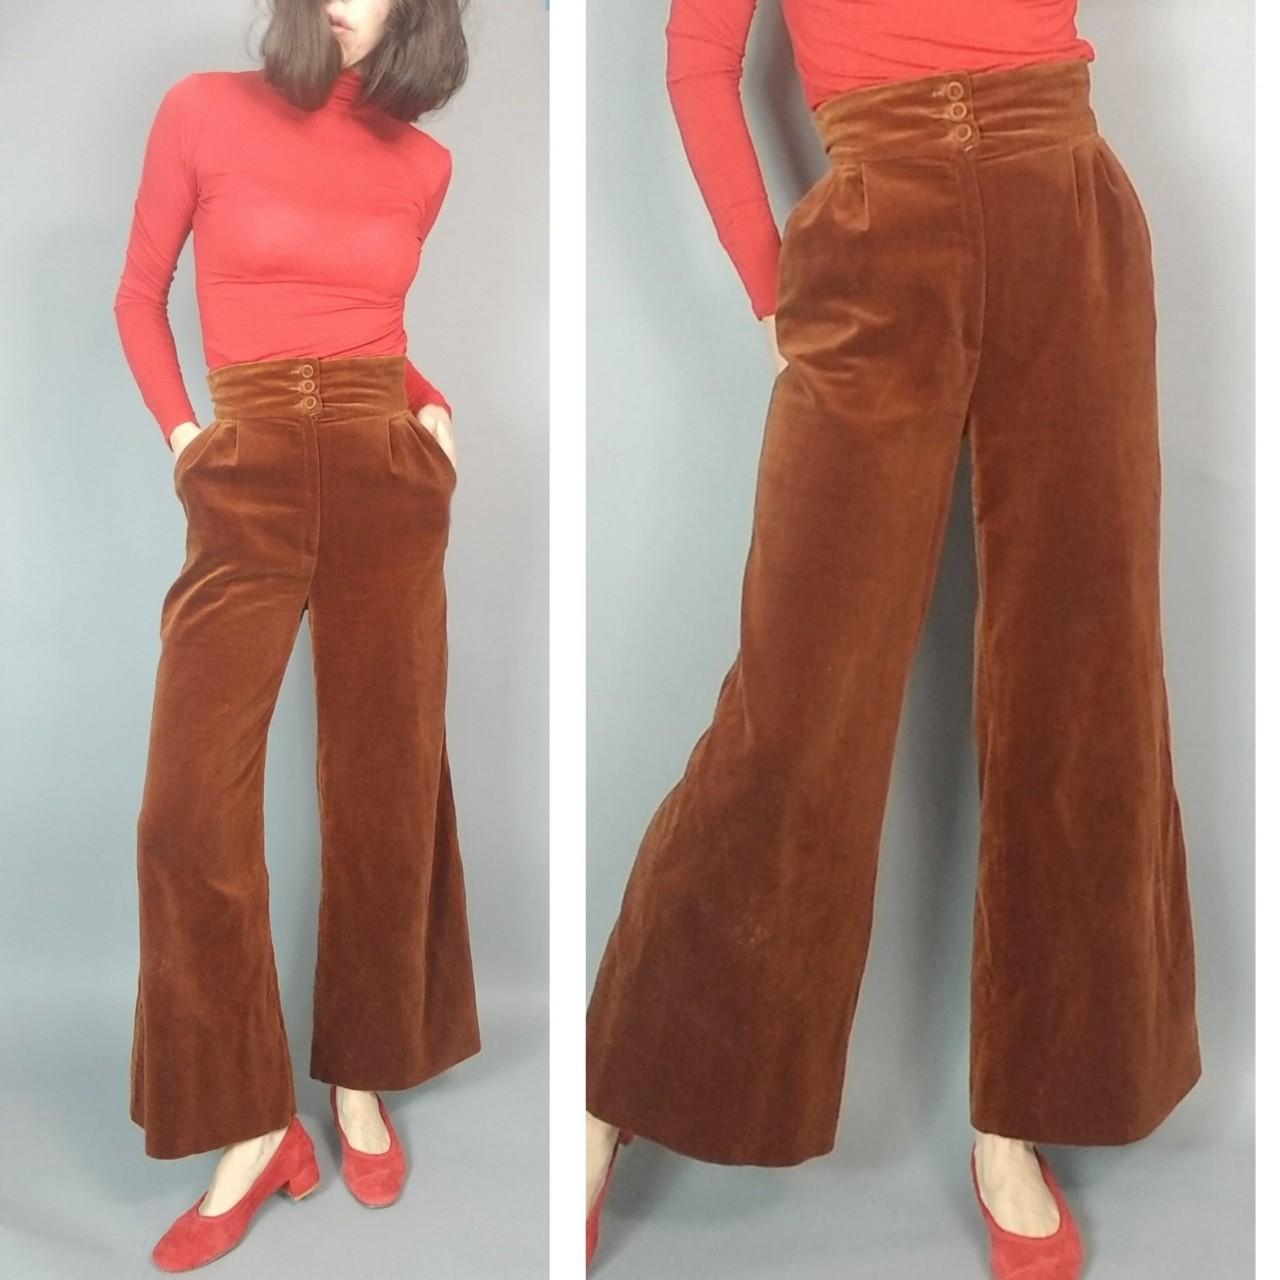 Vintage Strawberry Plant Corduroy Bell Bottom Pants 70s Brown